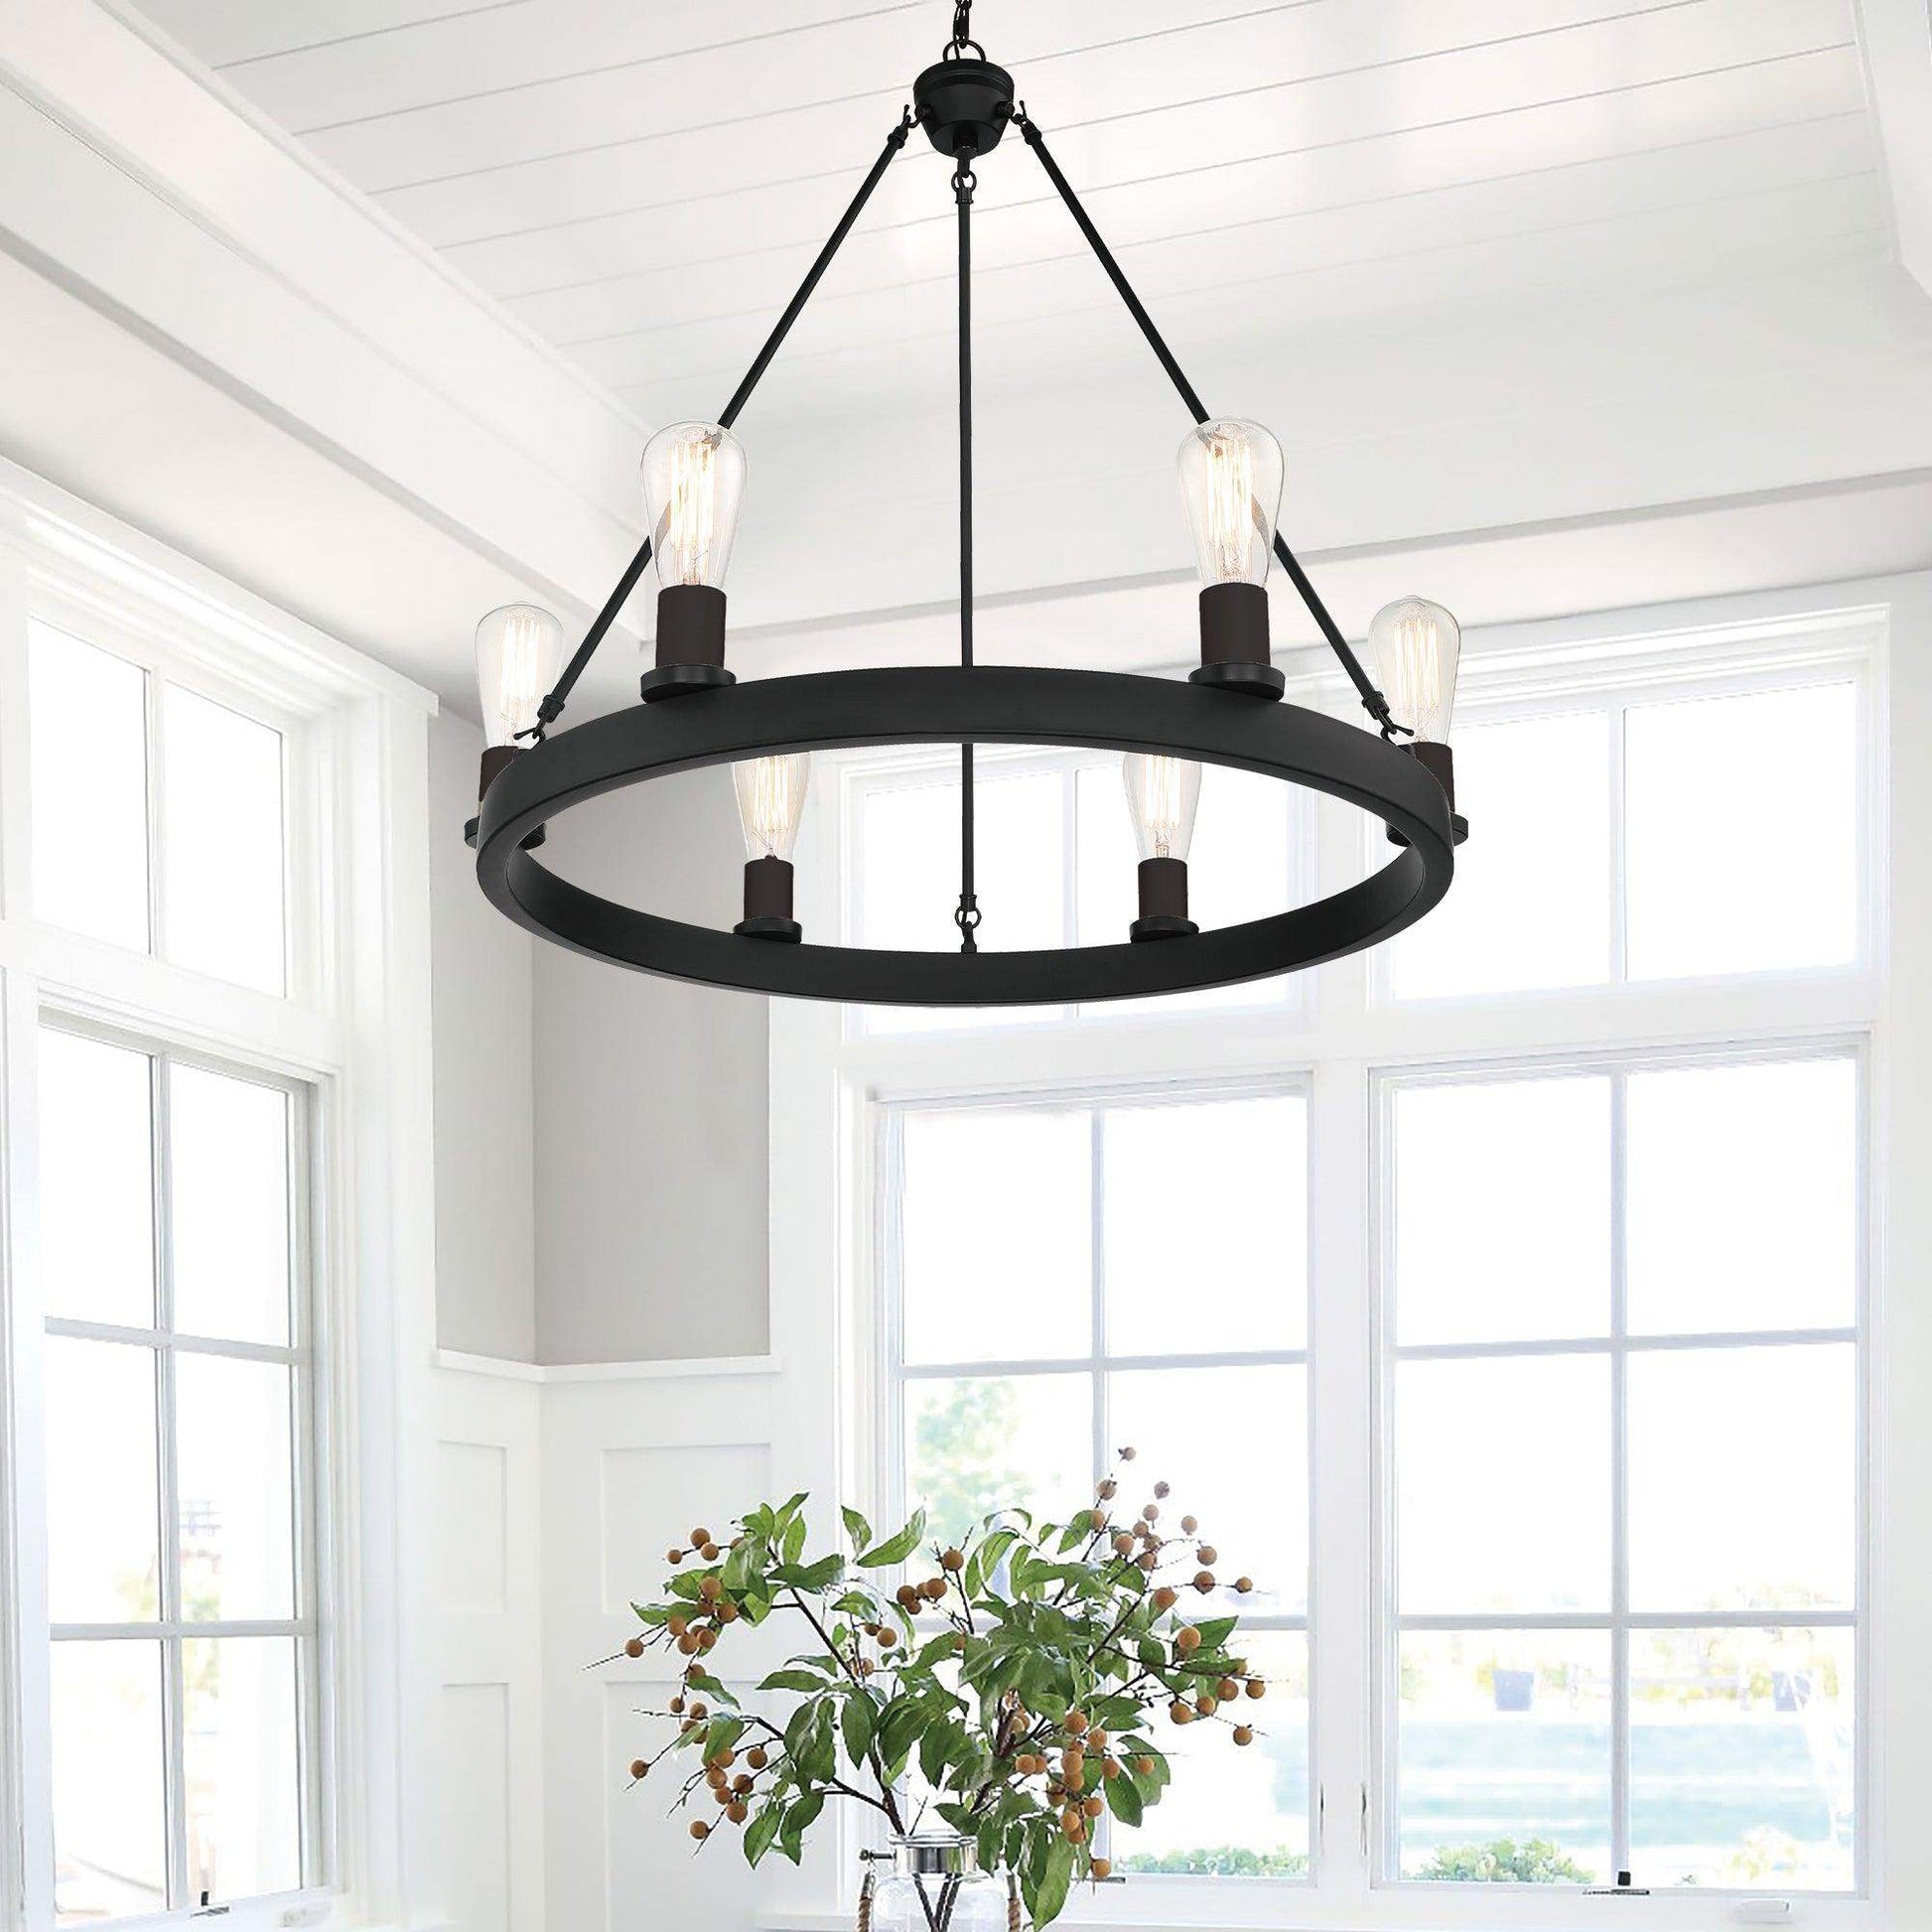 6 light wagon wheel chandelier (9) by ACROMA